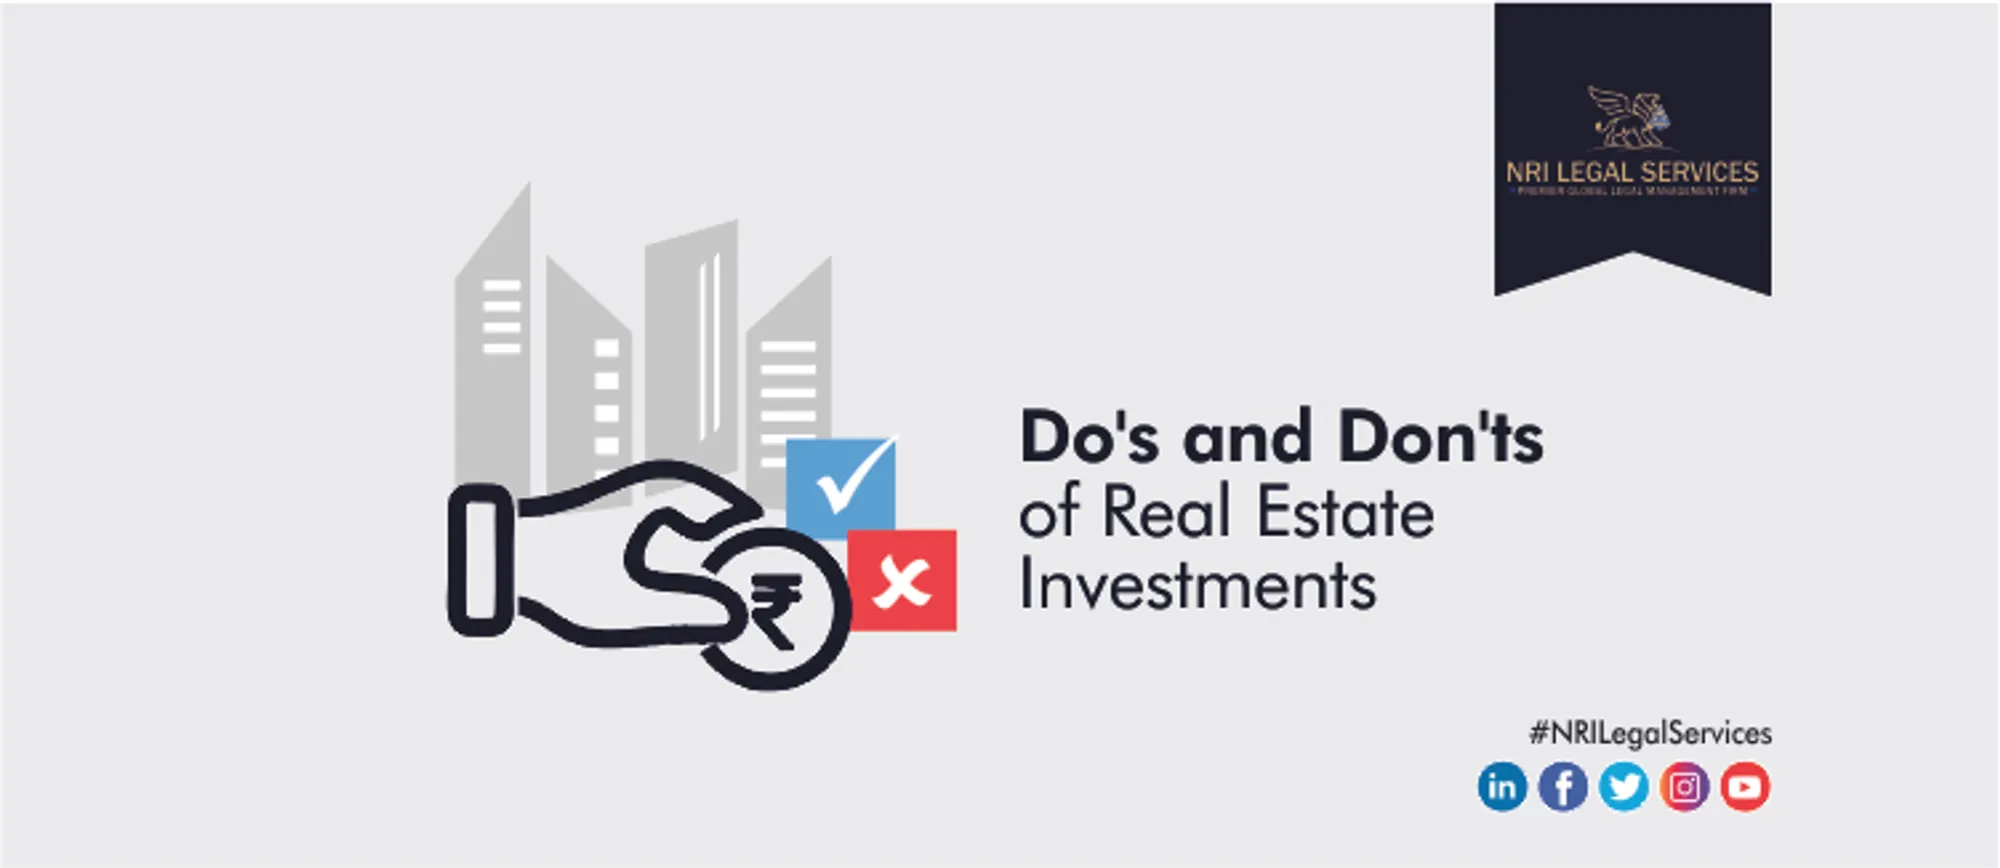 Do’s and Don’ts of Real Estate Investments